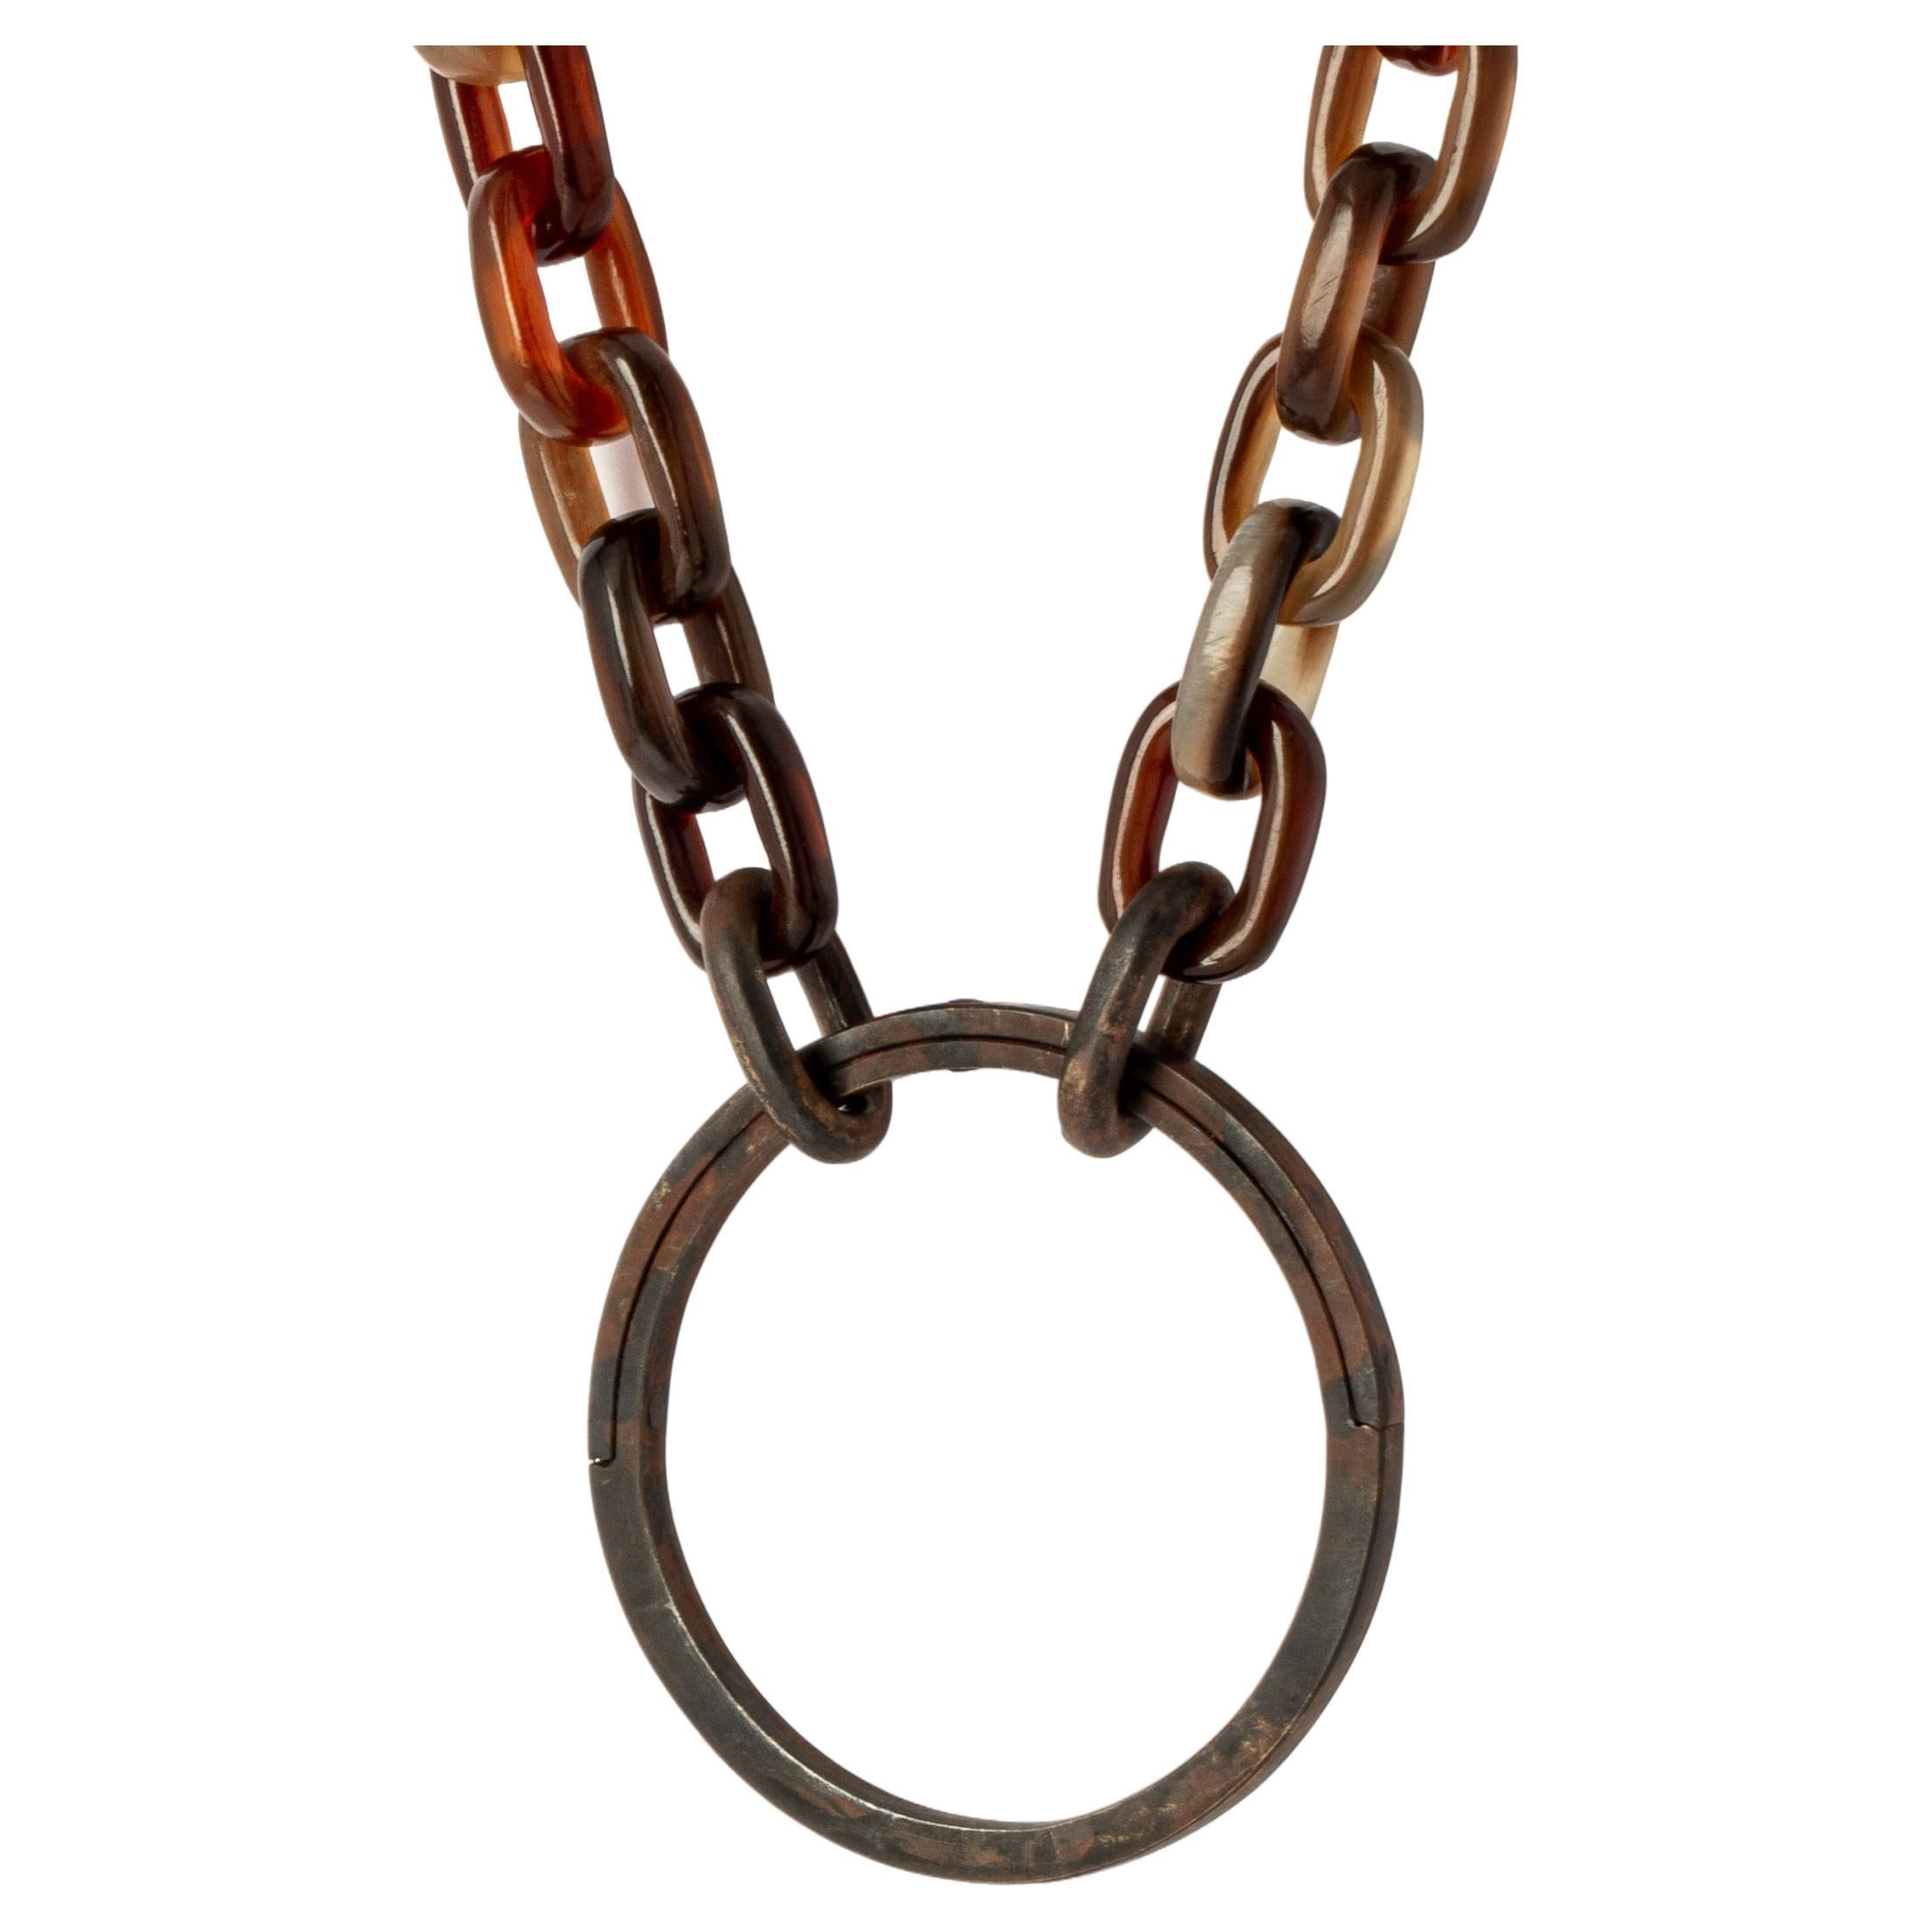 All organic chain is carved by hand. Chains made from horn is modeled and constructed into chain links
The Charm System is an interrelated group of products that can be mixed and matched or worn individually.
Chain length: 900 mm
Portal diameter: 55